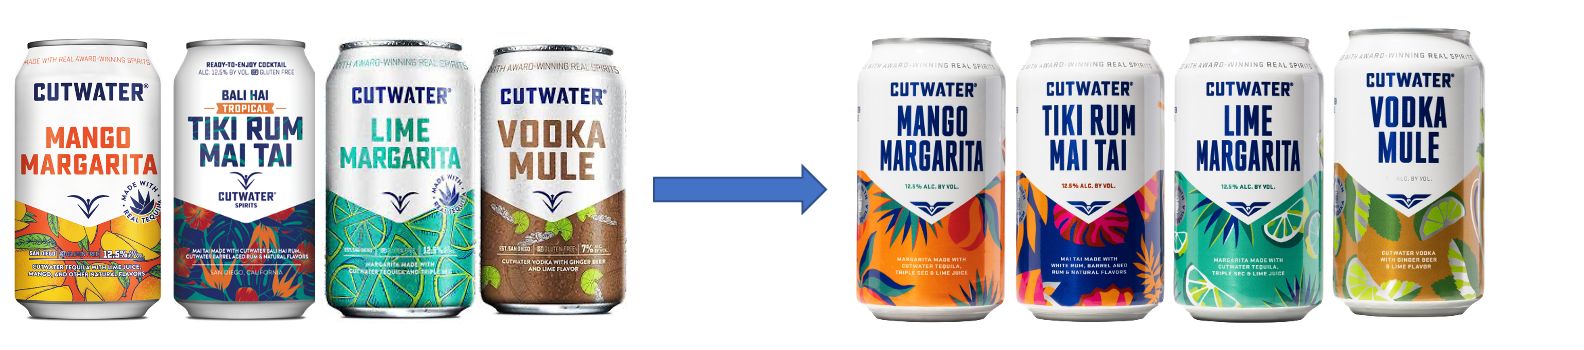 Cutwater Adopts New Identity, Packaging Revamp